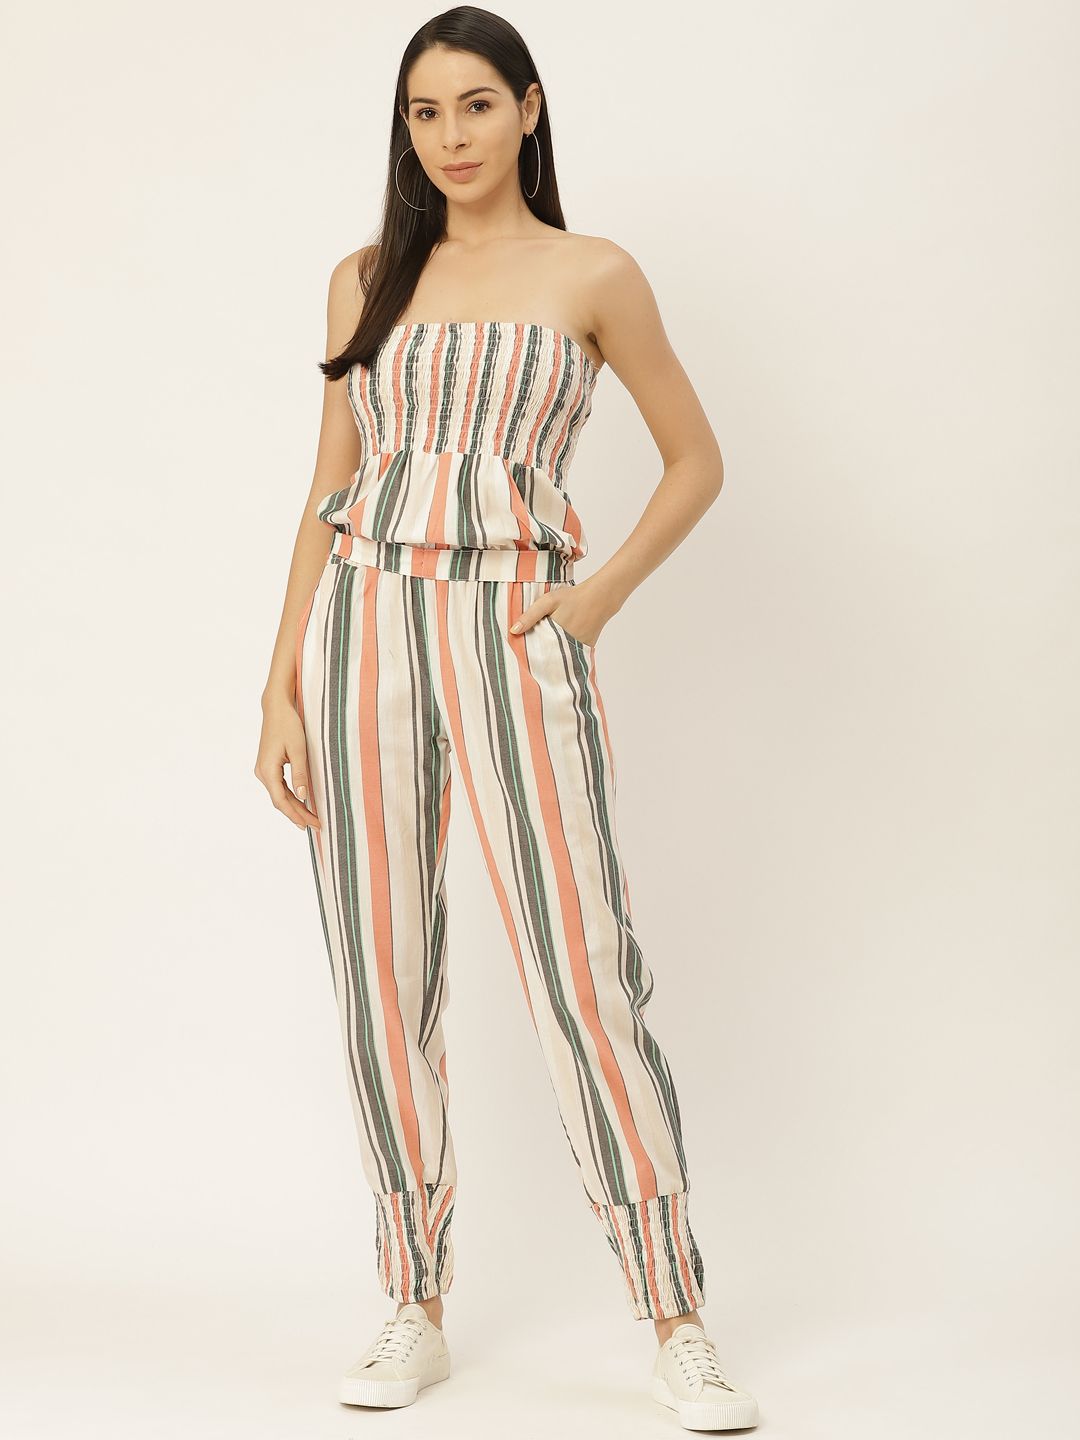 Belle Fille Women Off-White & Peach-Coloured Cotton Striped Basic Strapless Jumpsuit Price in India